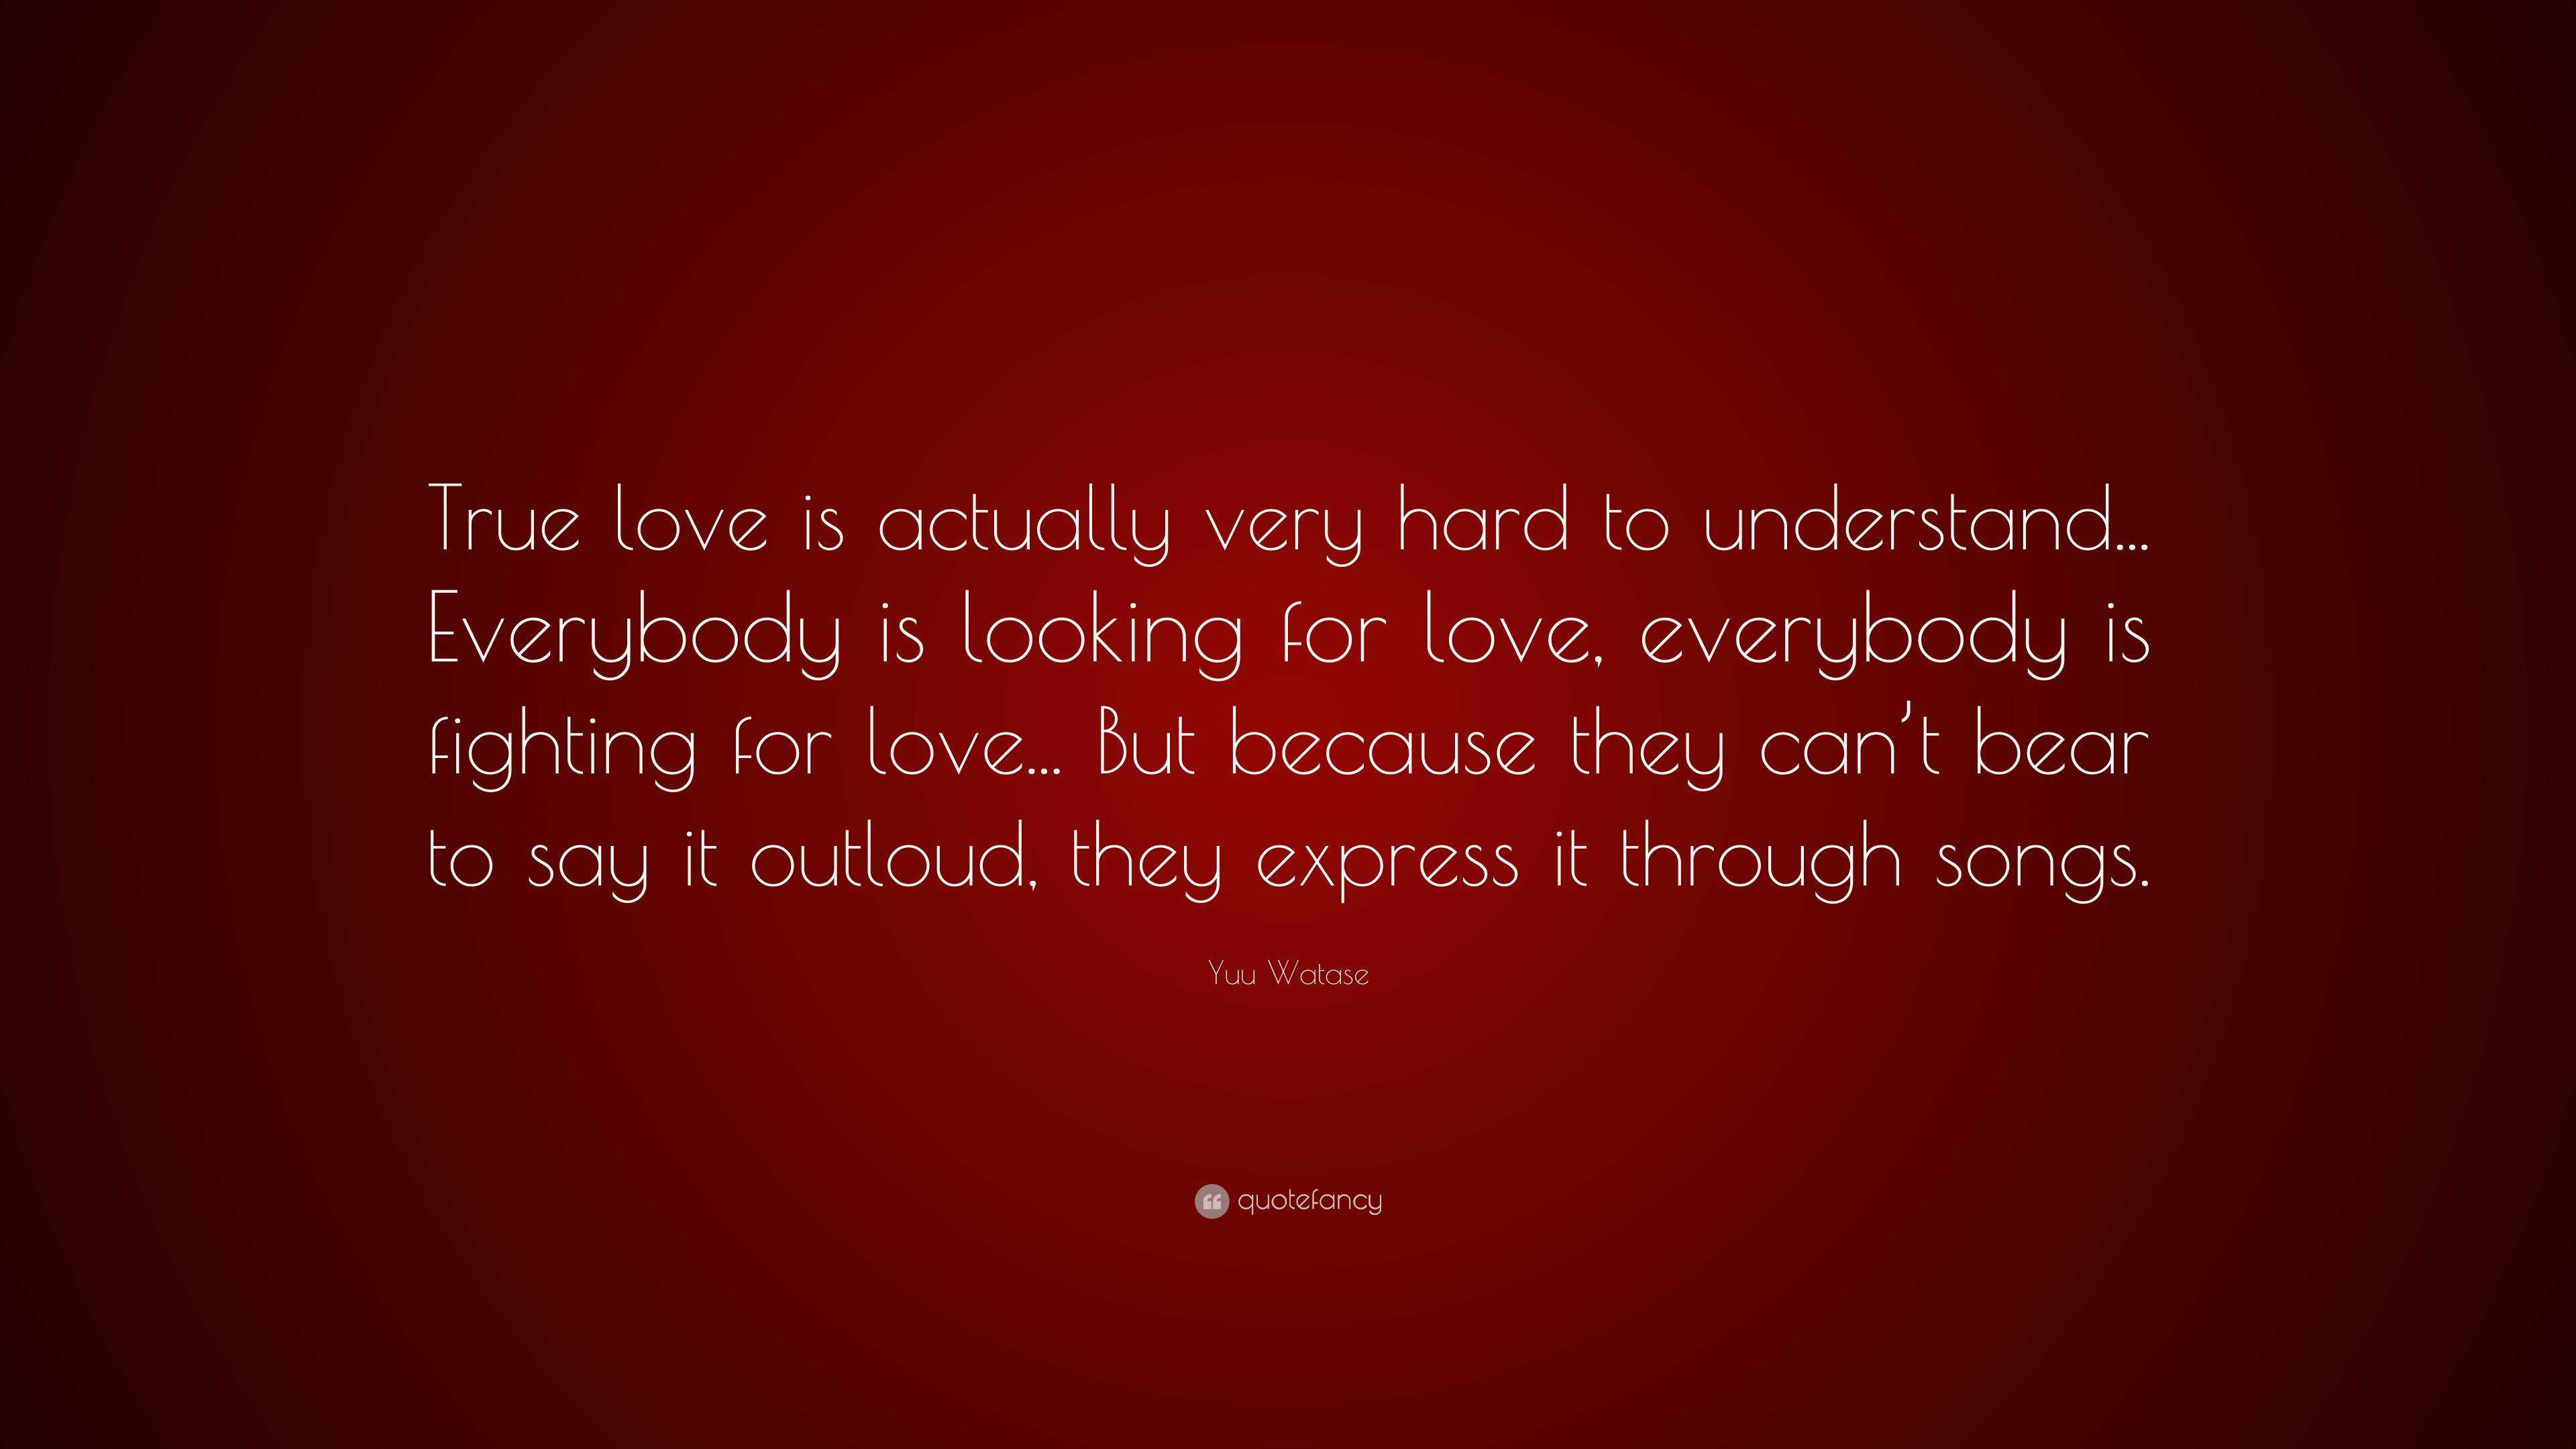 Yuu Watase Quote: “True love is actually very hard to understand ...